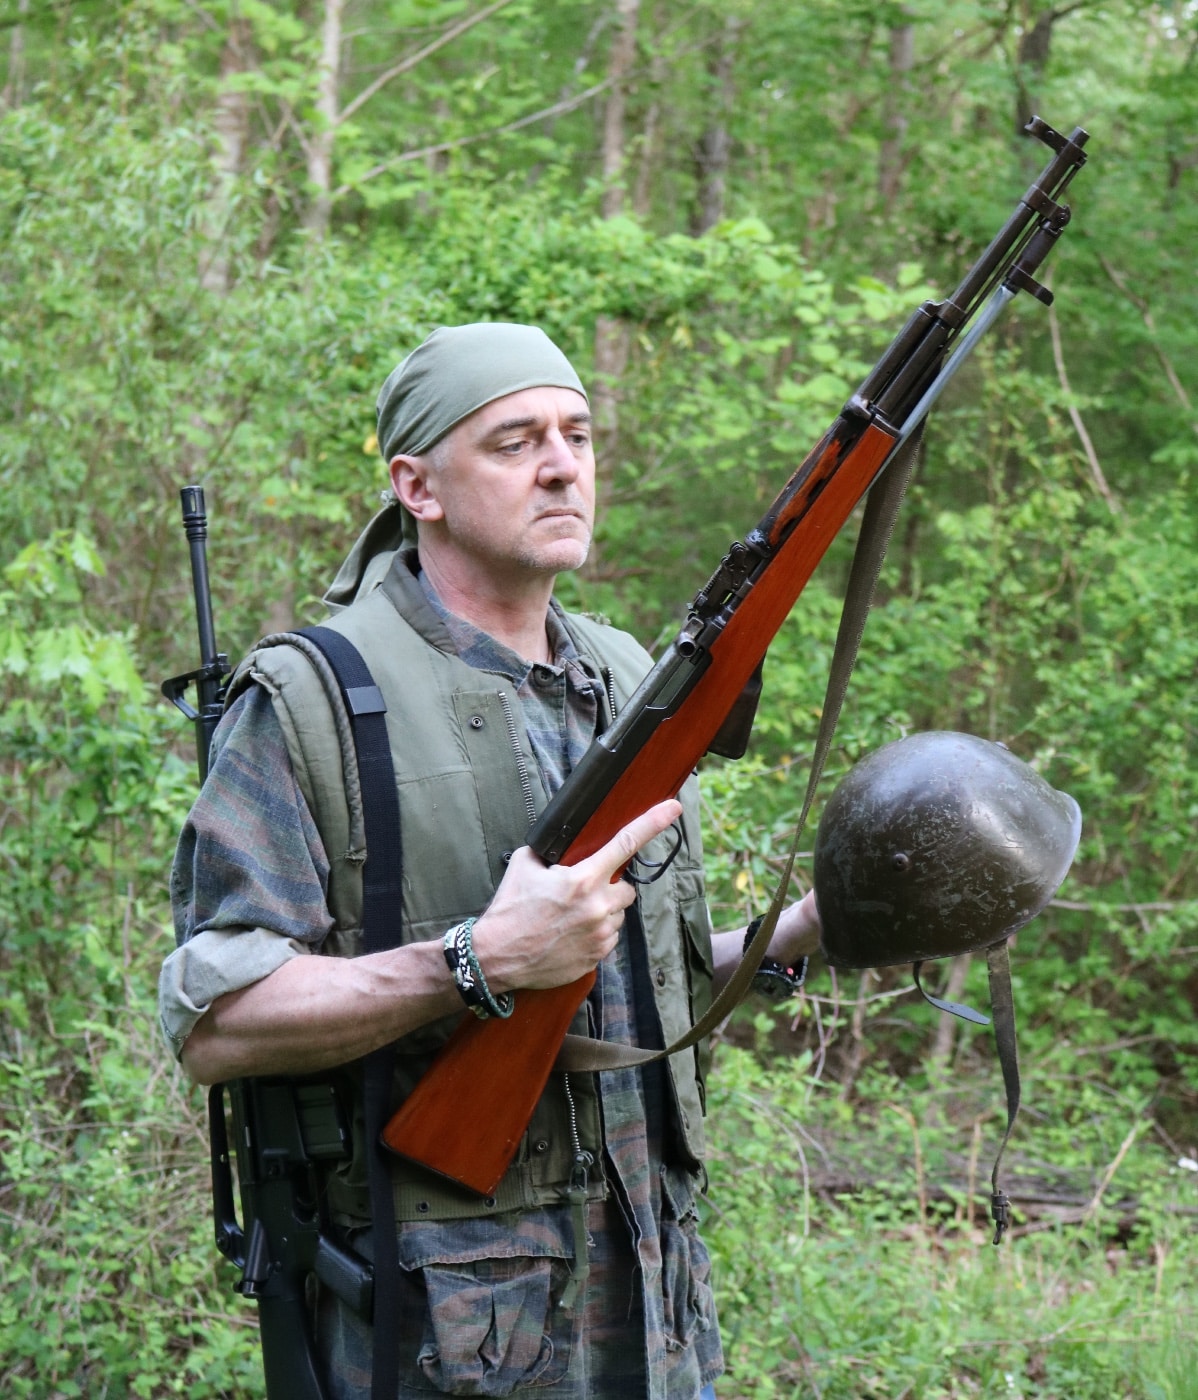 In this photo, we see the author with the Chinese SKS rifle he discusses in the article. The SKS is a semi-automatic rifle designed by Soviet small arms designer Sergei Gavrilovich Simonov in 1945. The SKS was first produced in the Soviet Union but was later widely exported and manufactured by various nations.